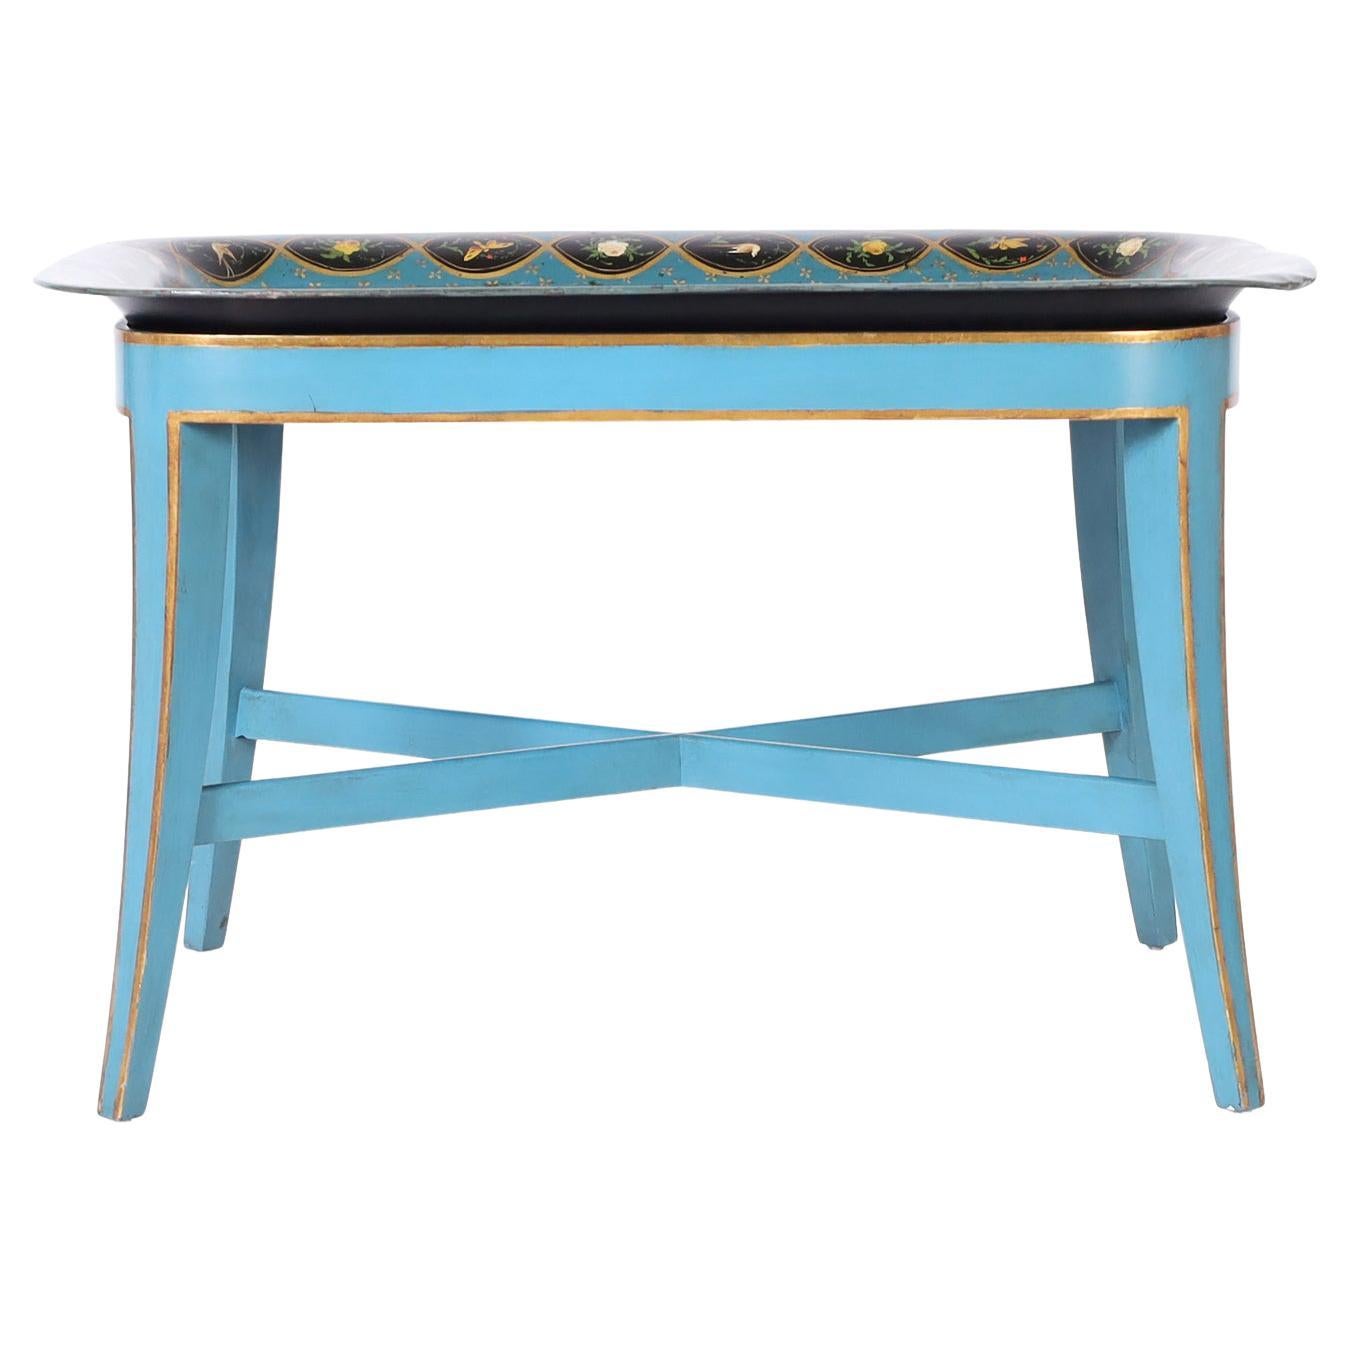 Occasional table with an antique tole tray top hand decorated with chinoiserie on a blue background with a floral border. The later custom made wood stand is painted blue with gold leaf trim.